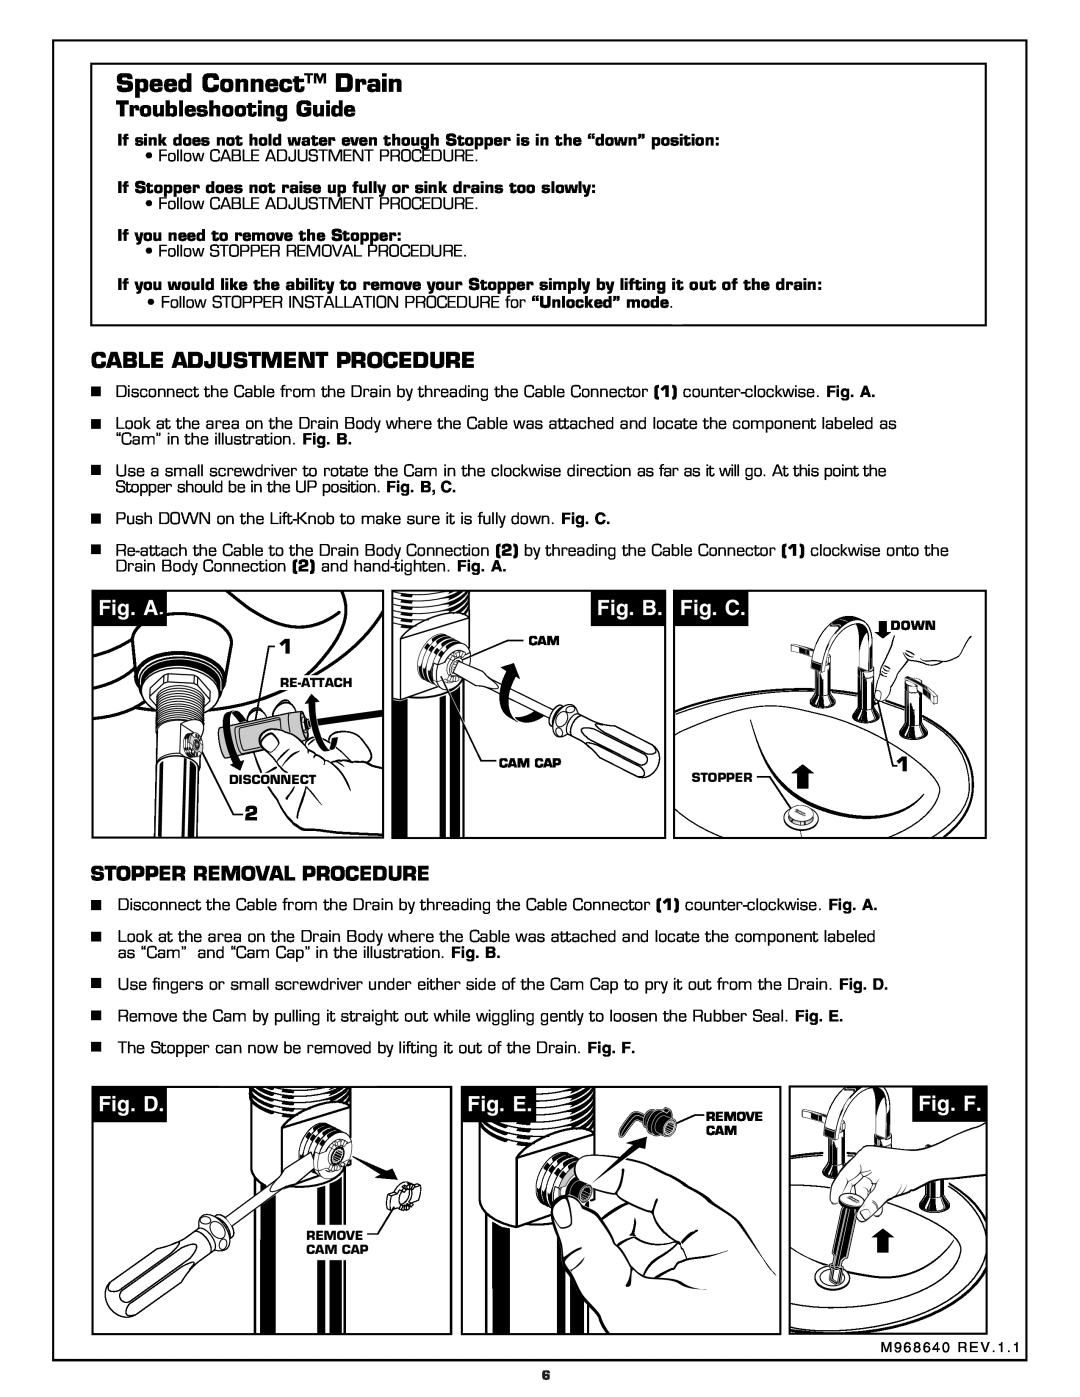 American Standard 7430.821 Troubleshooting Guide, Cable Adjustment Procedure, Fig. A, Fig. B, Fig. C, Fig. D, Fig. E 